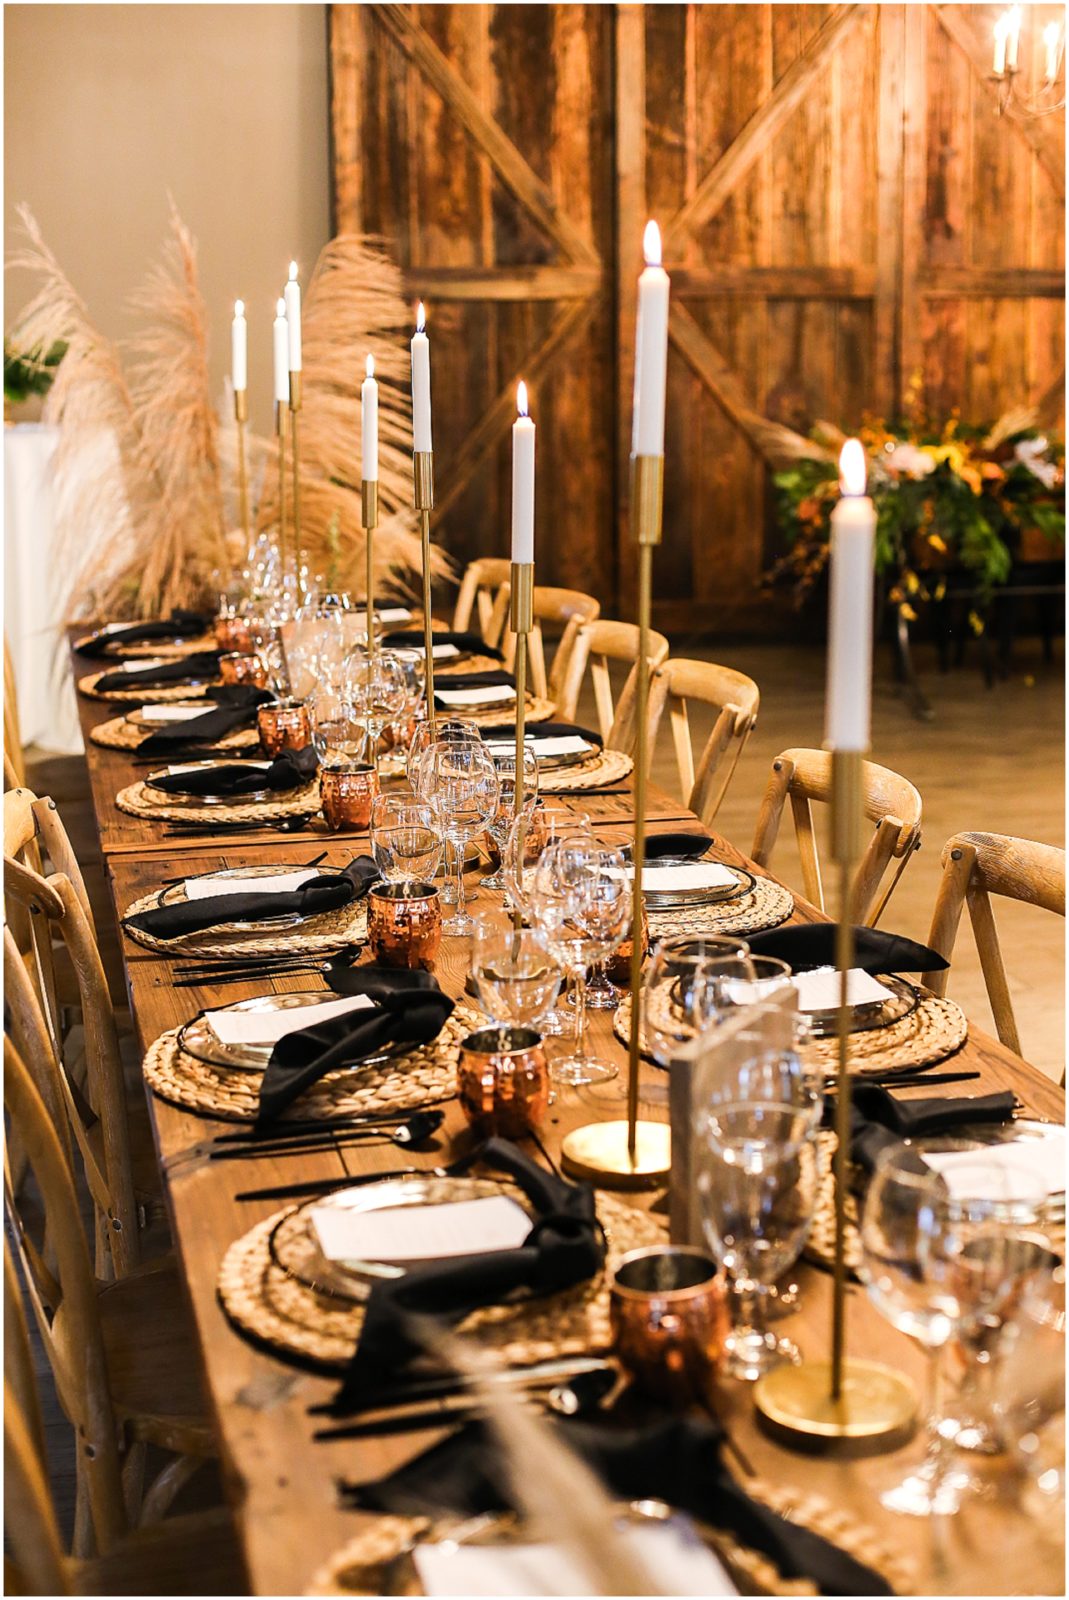 FALL THEMED WEDDING AT 1890 - WEDDING DECOR BY SUPPLY EVENT - WEDDING PHOTOS PHOTOGRAPHY BY MARIAM SAIFAN PHOTOGRAPHY